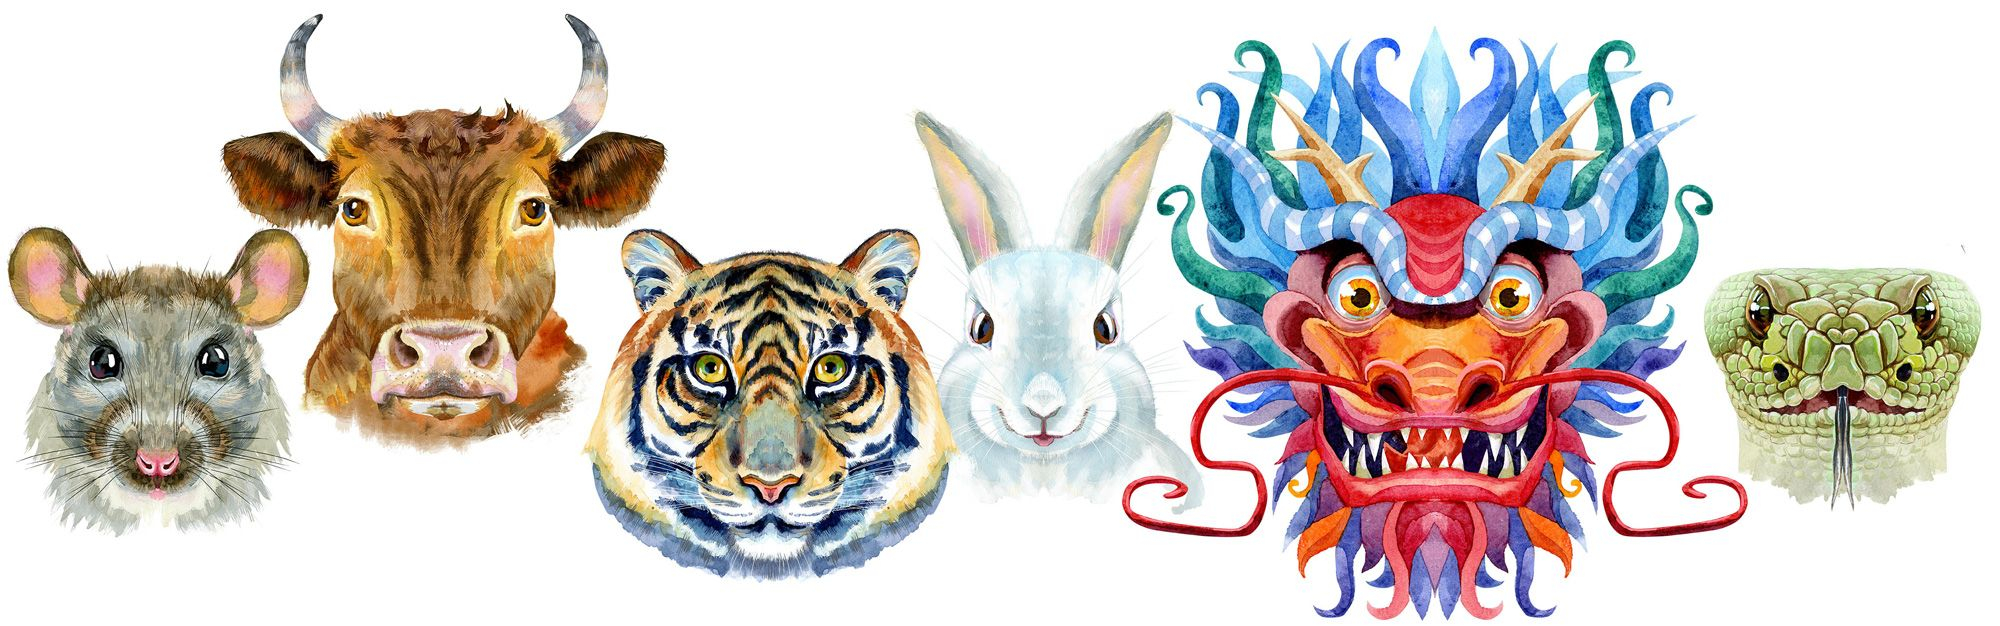 Chinese Zodiac Animal Signs And Chinese New Year Meaning